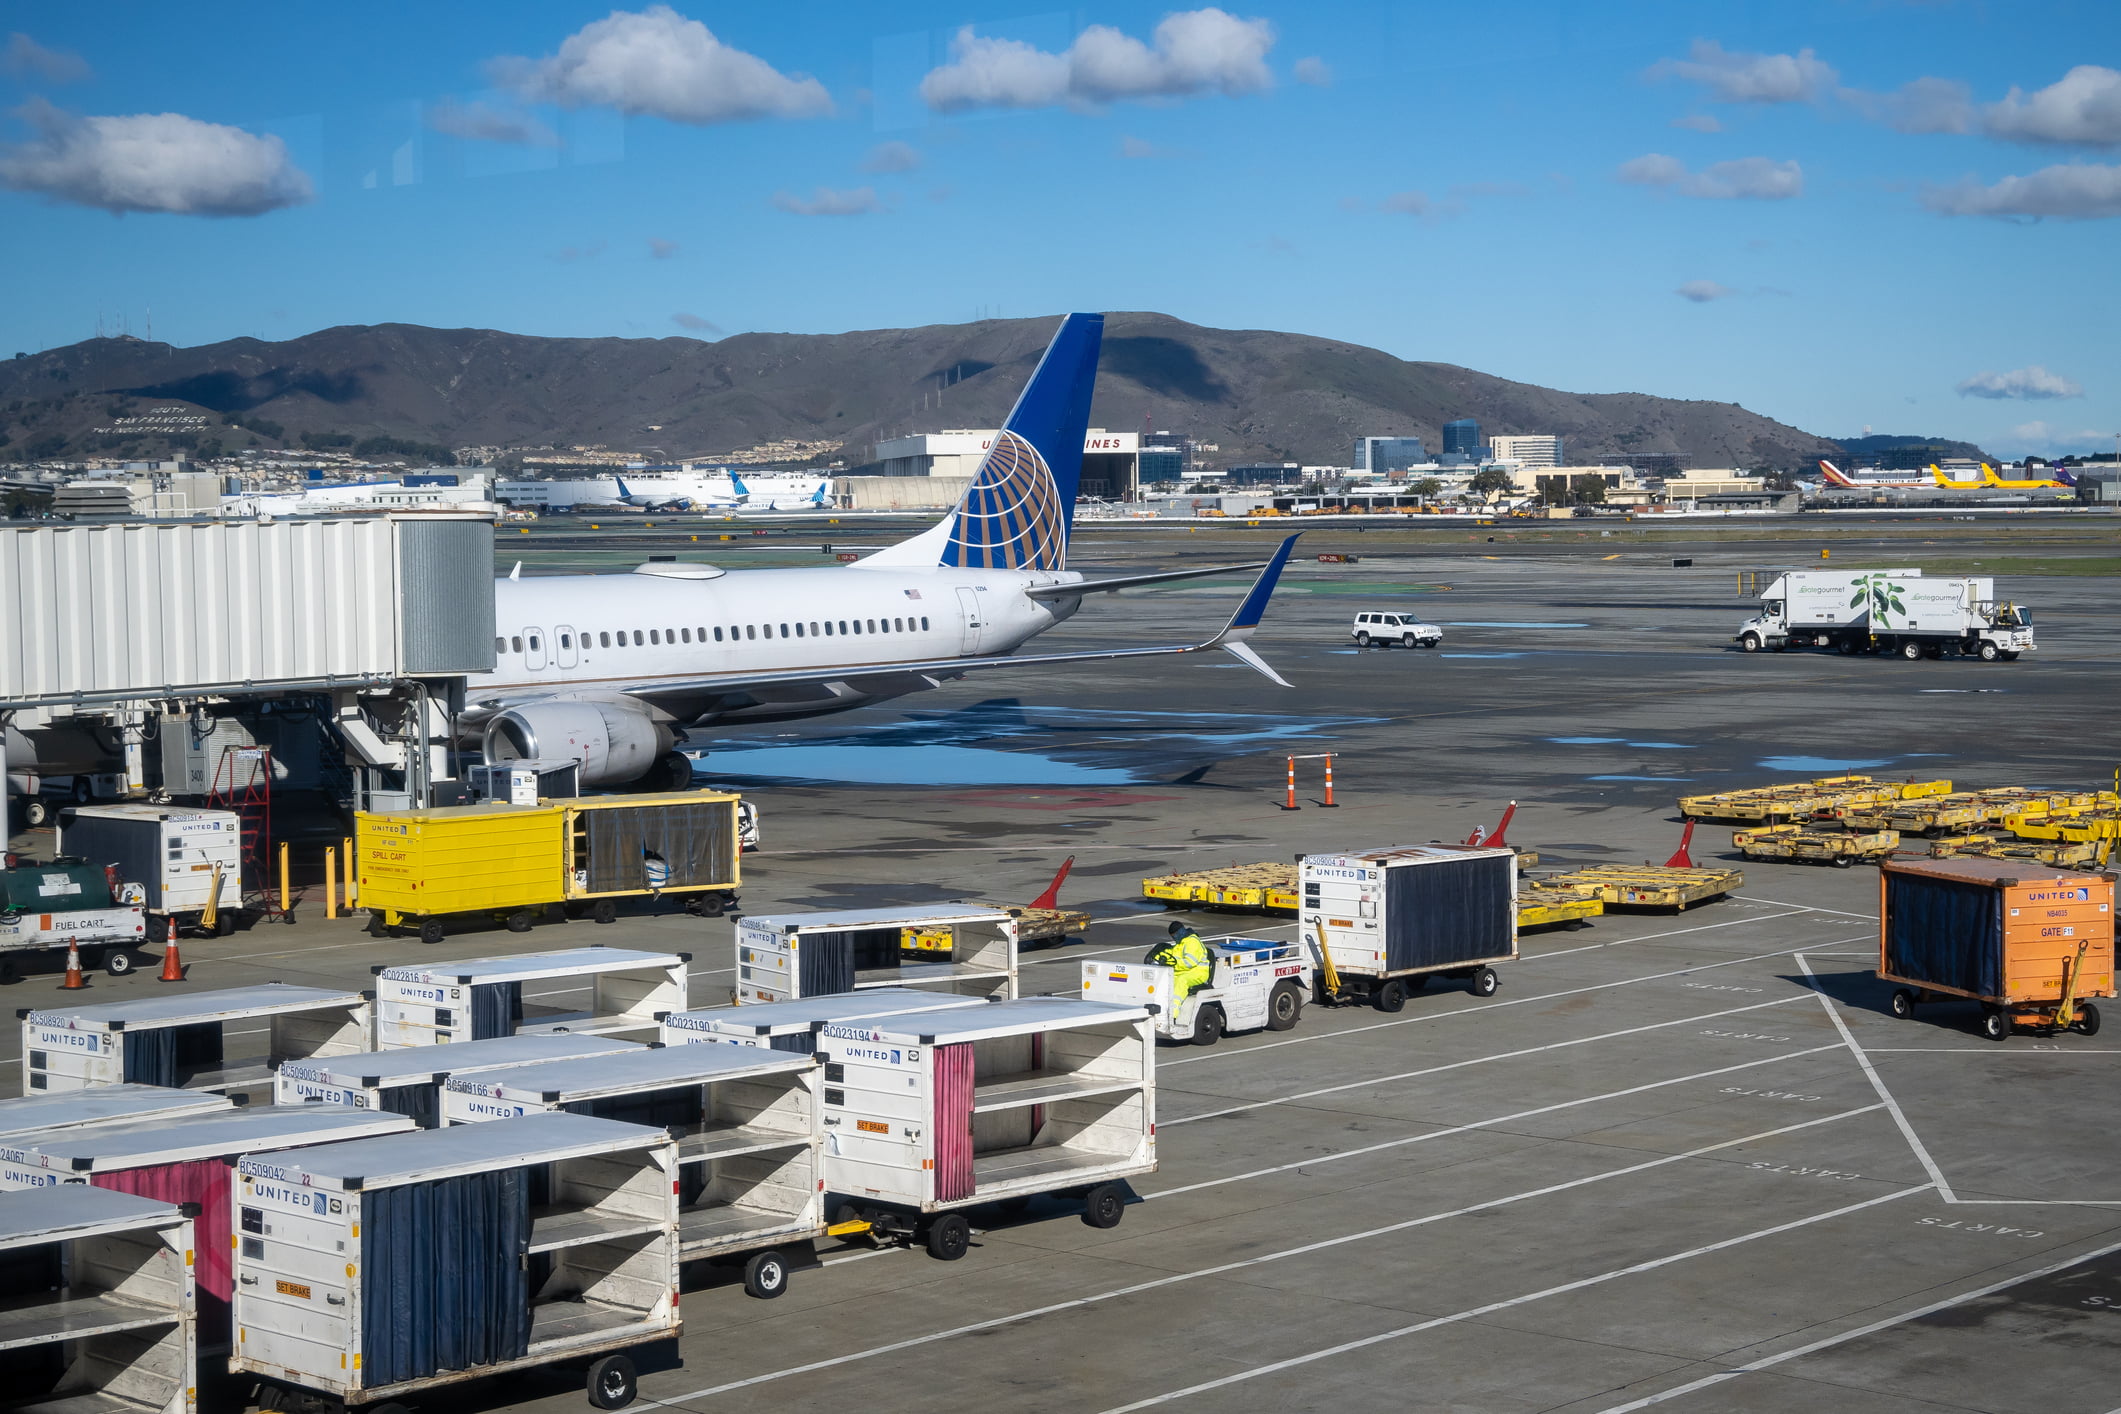 San Francisco, Dec 12, 2022. United Airlines airplane ready for boarding, viewed from the glass window of the San Francisco International airport